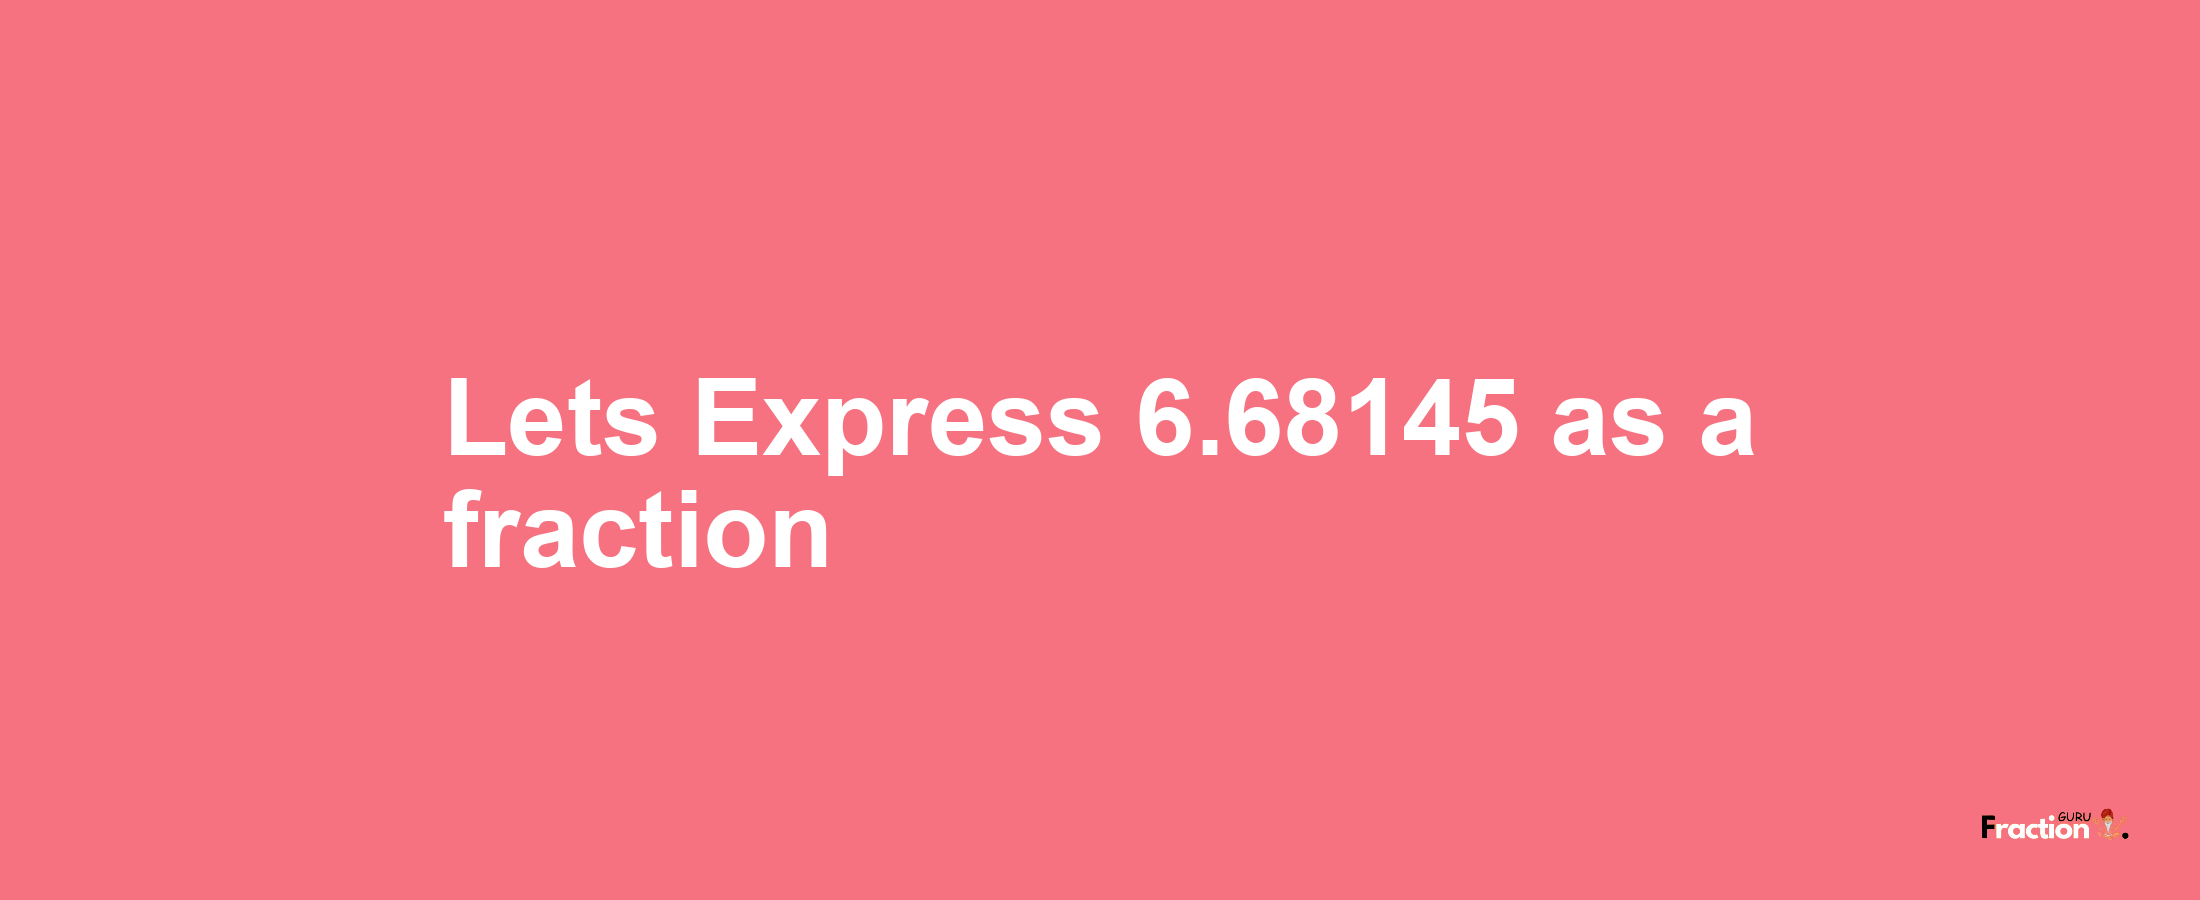 Lets Express 6.68145 as afraction